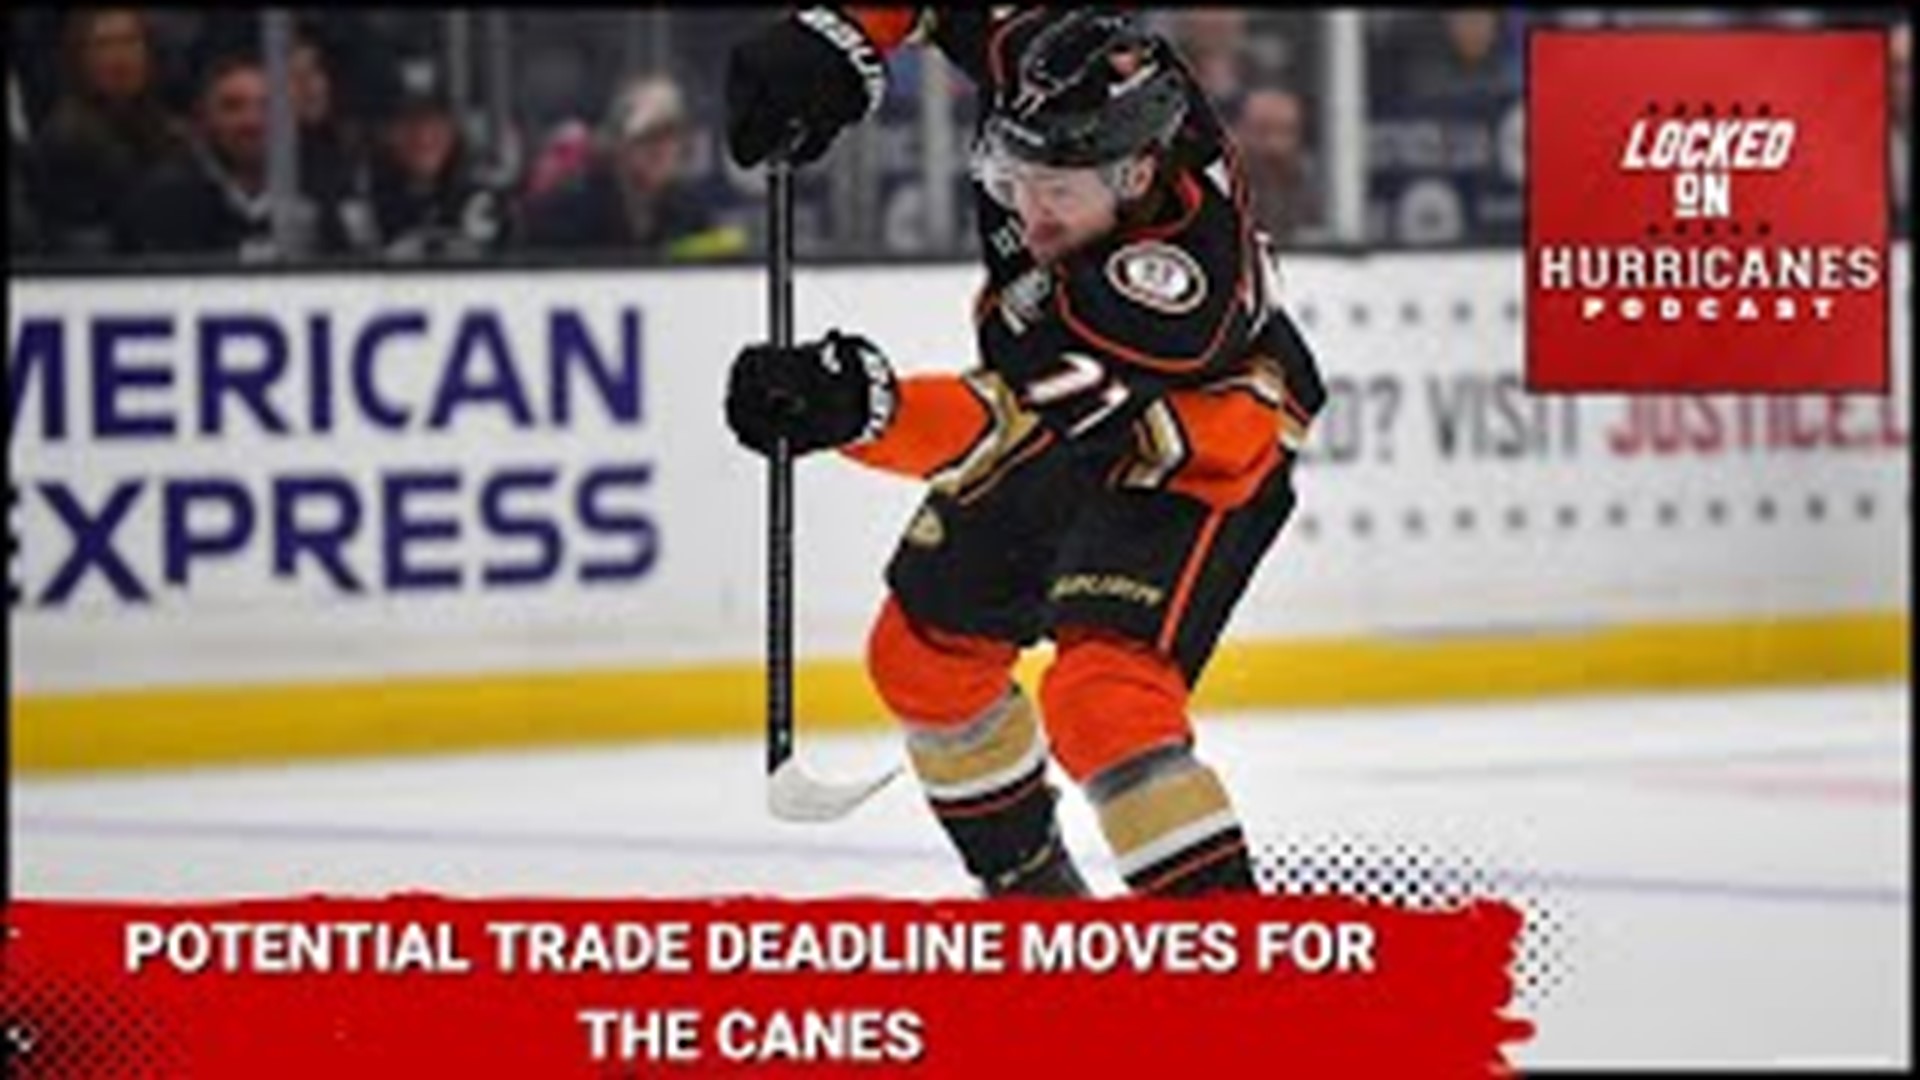 The Canes could decide to make a big move or two this year. That and more on Locked On Hurricanes.